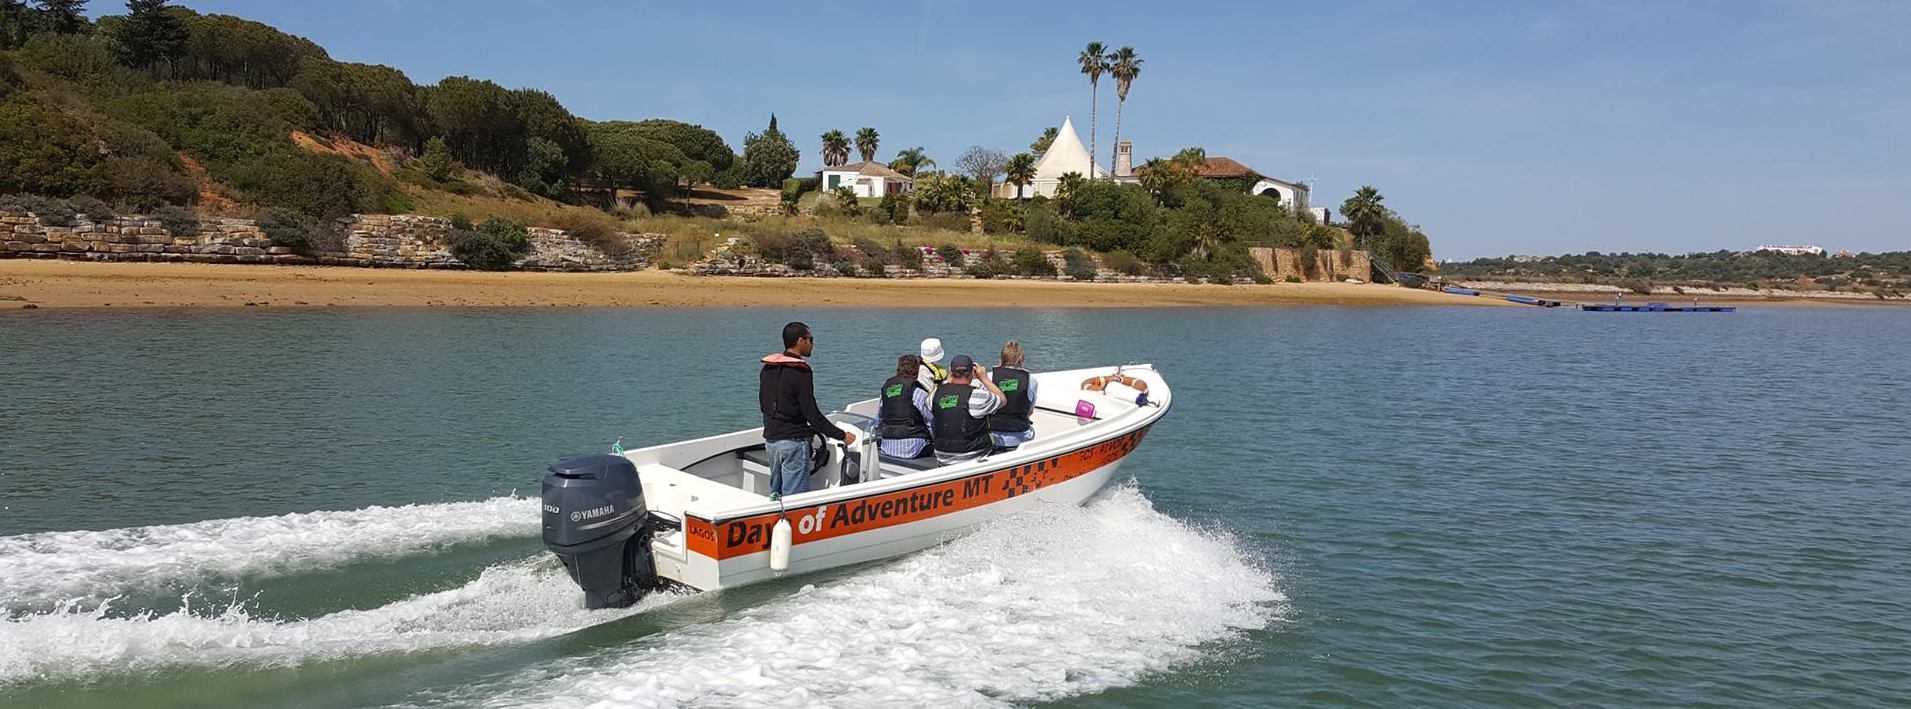 Use the scenic route in between Lagos and Alvor